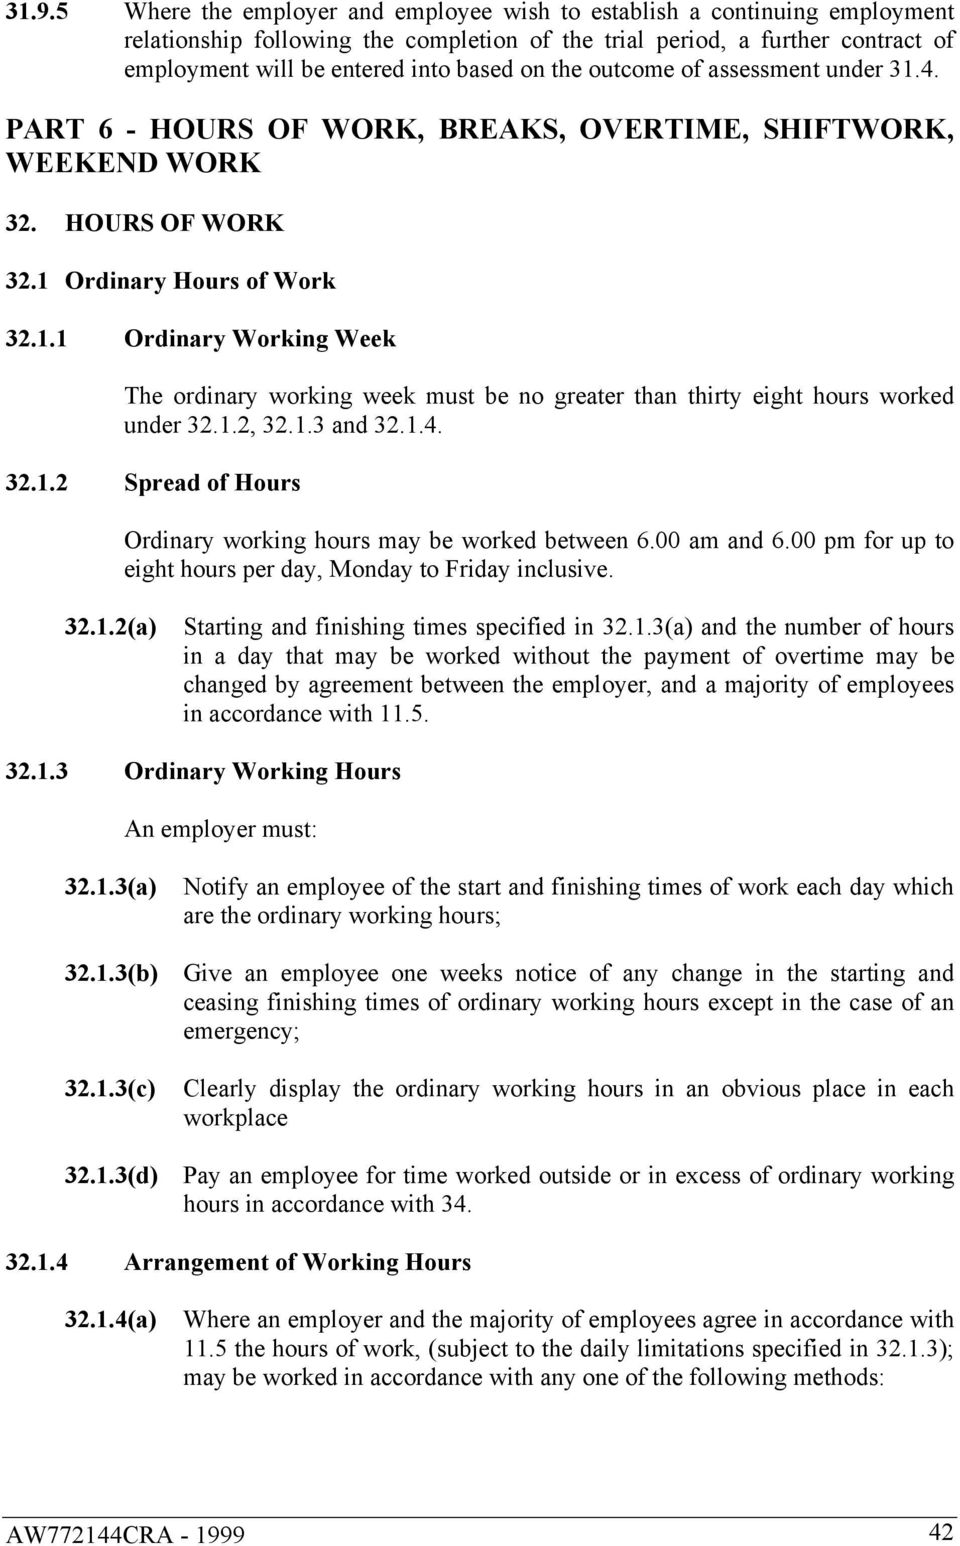 1.2, 32.1.3 and 32.1.4. 32.1.2 Spread of Hours Ordinary working hours may be worked between 6.00 am and 6.00 pm for up to eight hours per day, Monday to Friday inclusive. 32.1.2(a) Starting and finishing times specified in 32.